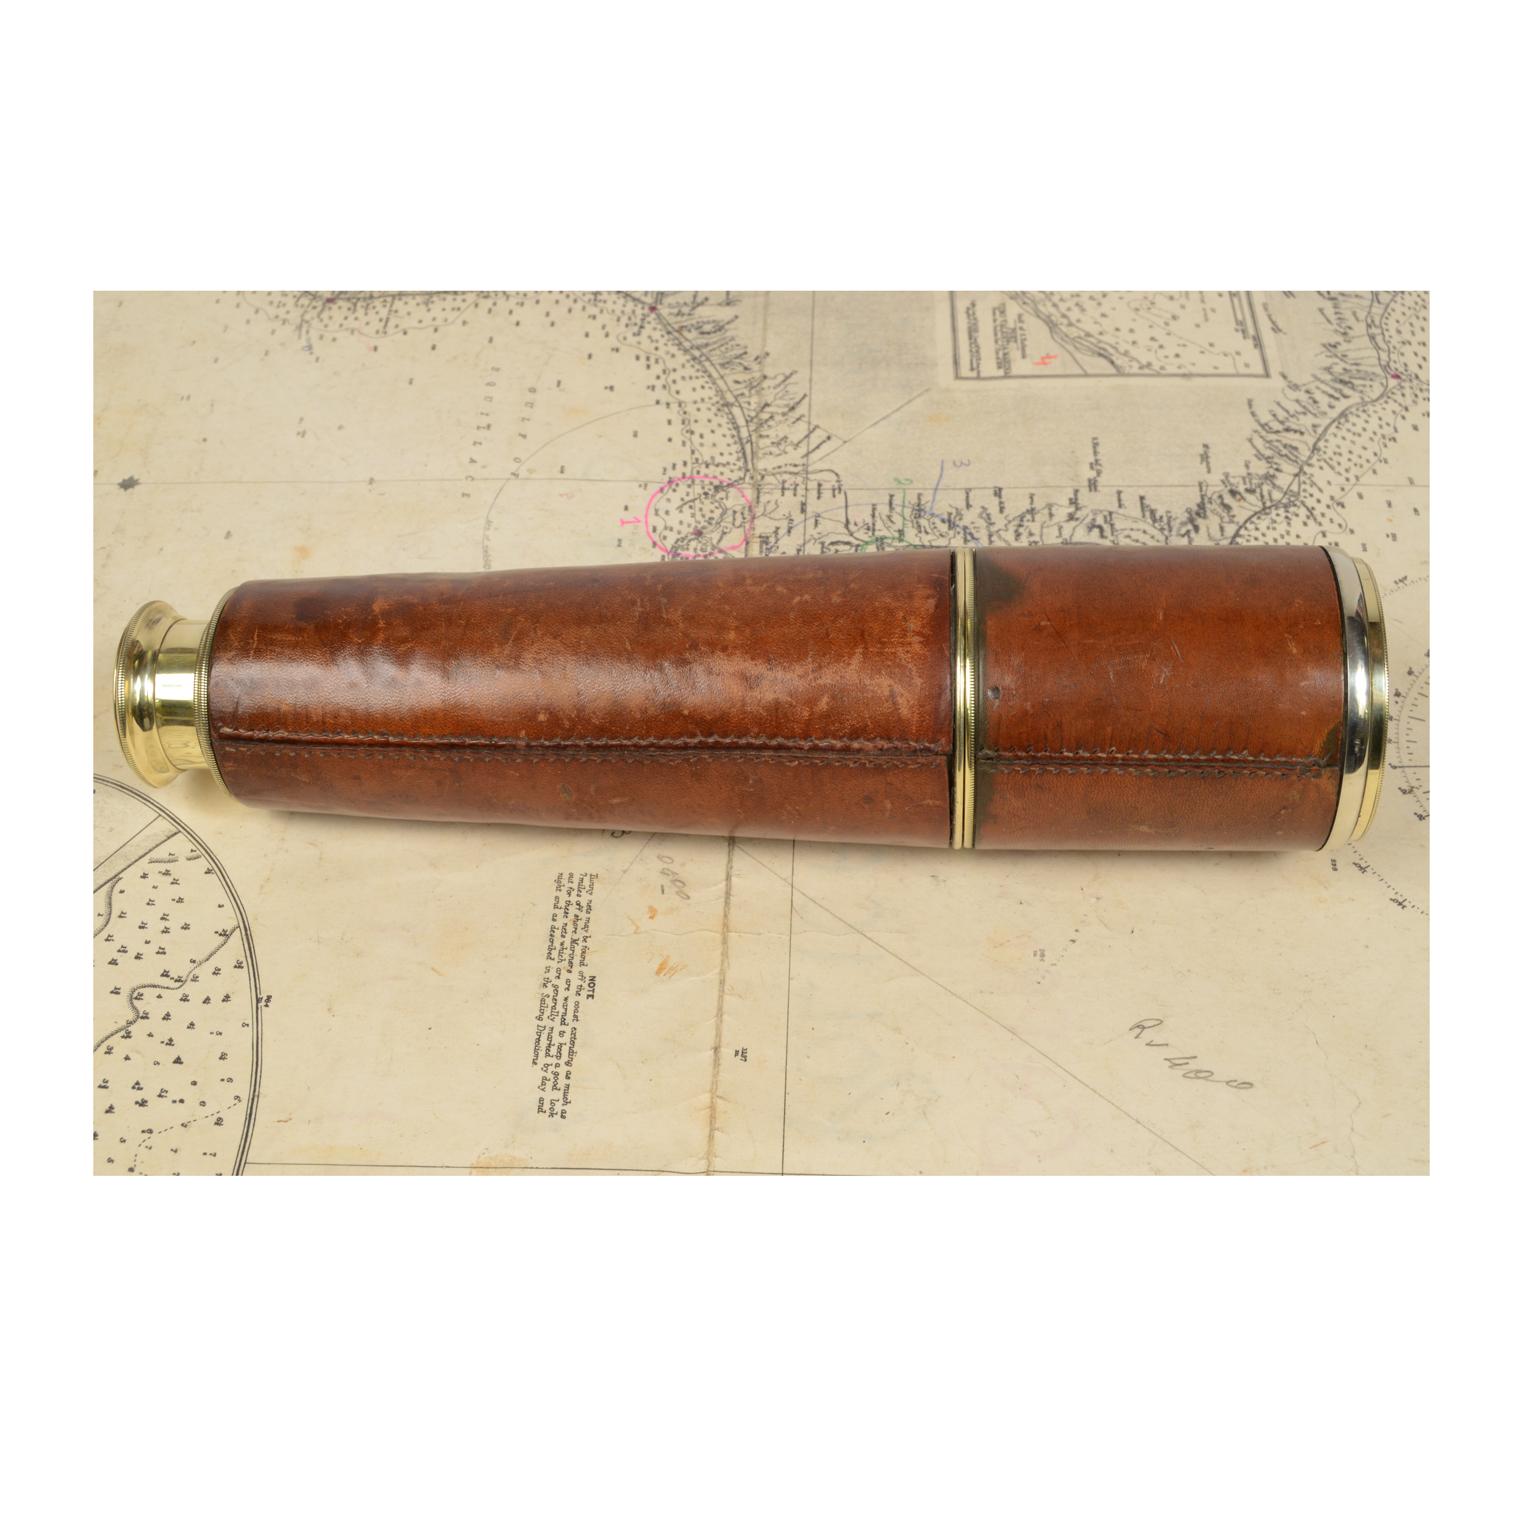 20th Century Antique Nautical Telescope, Brass and Leather, Early 1900s